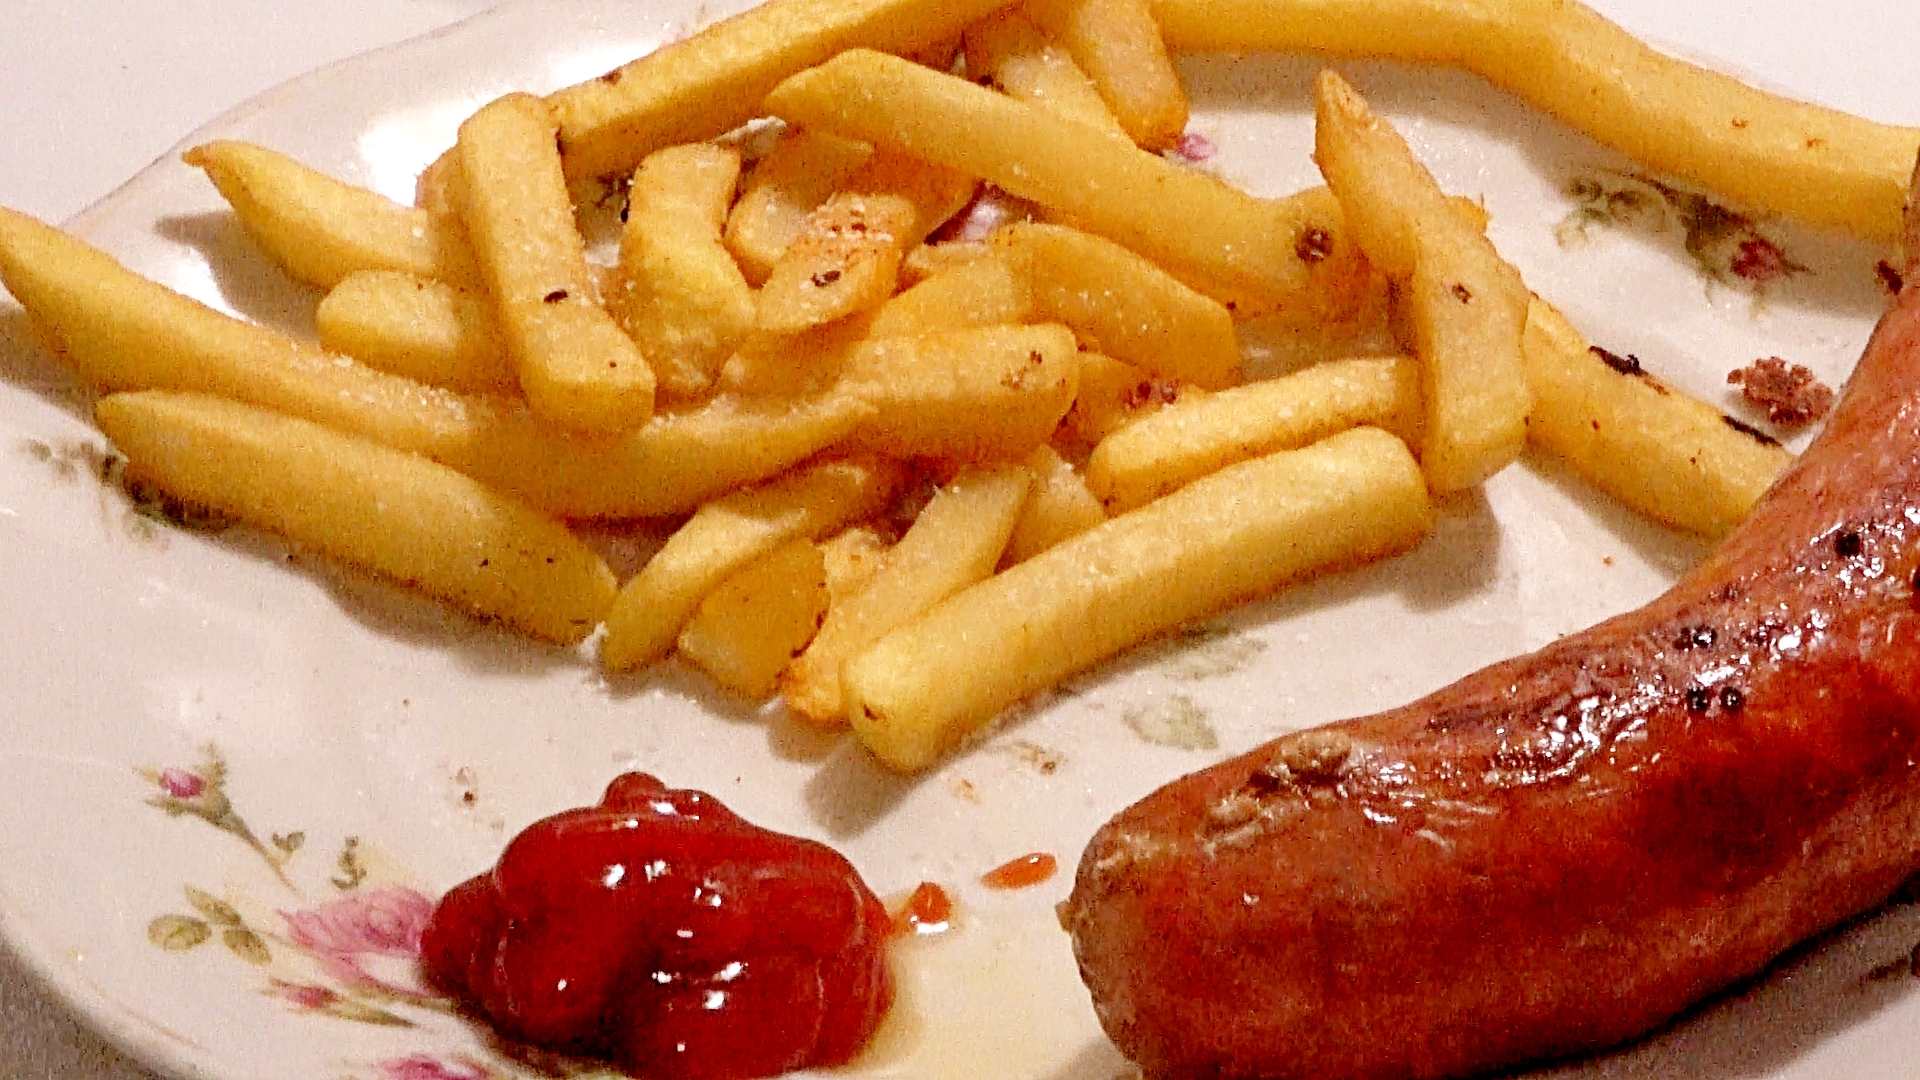 Hot Italian Sausage and French Fries